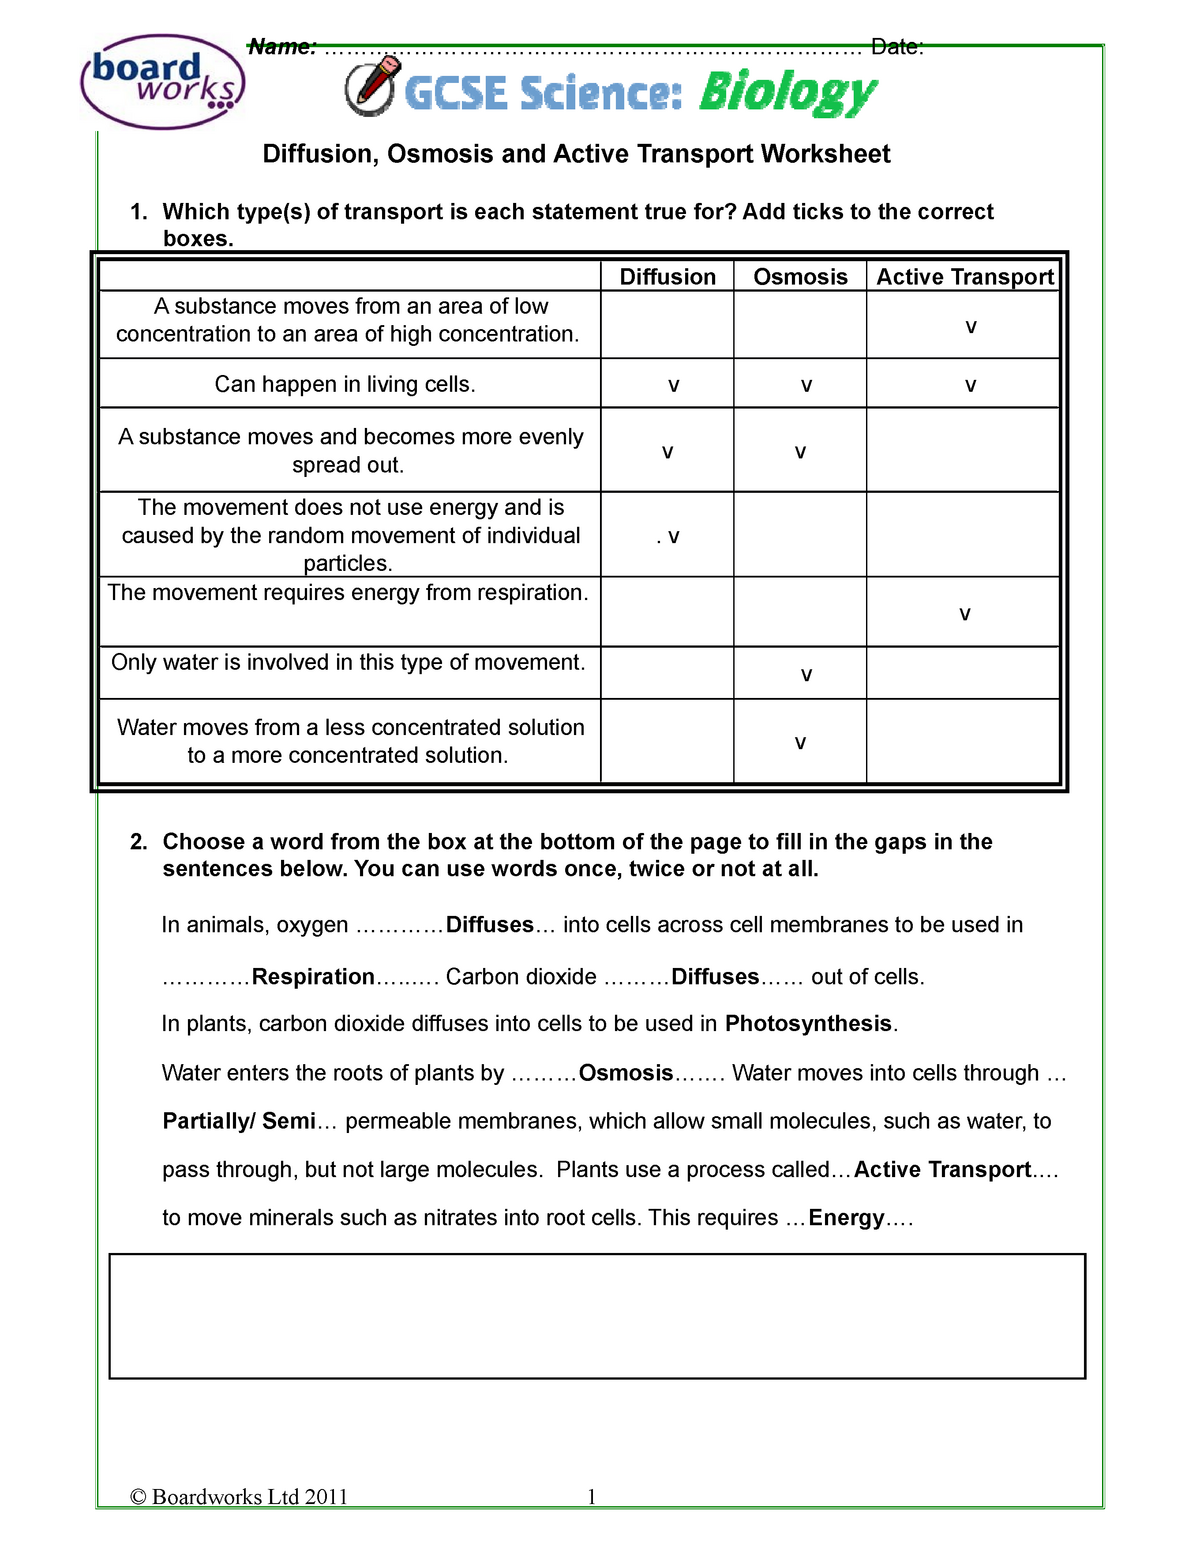 Diffusion Osmosis and Active Transport Worksheet F24 - BP 24 Intended For Cell Transport Review Worksheet Answers